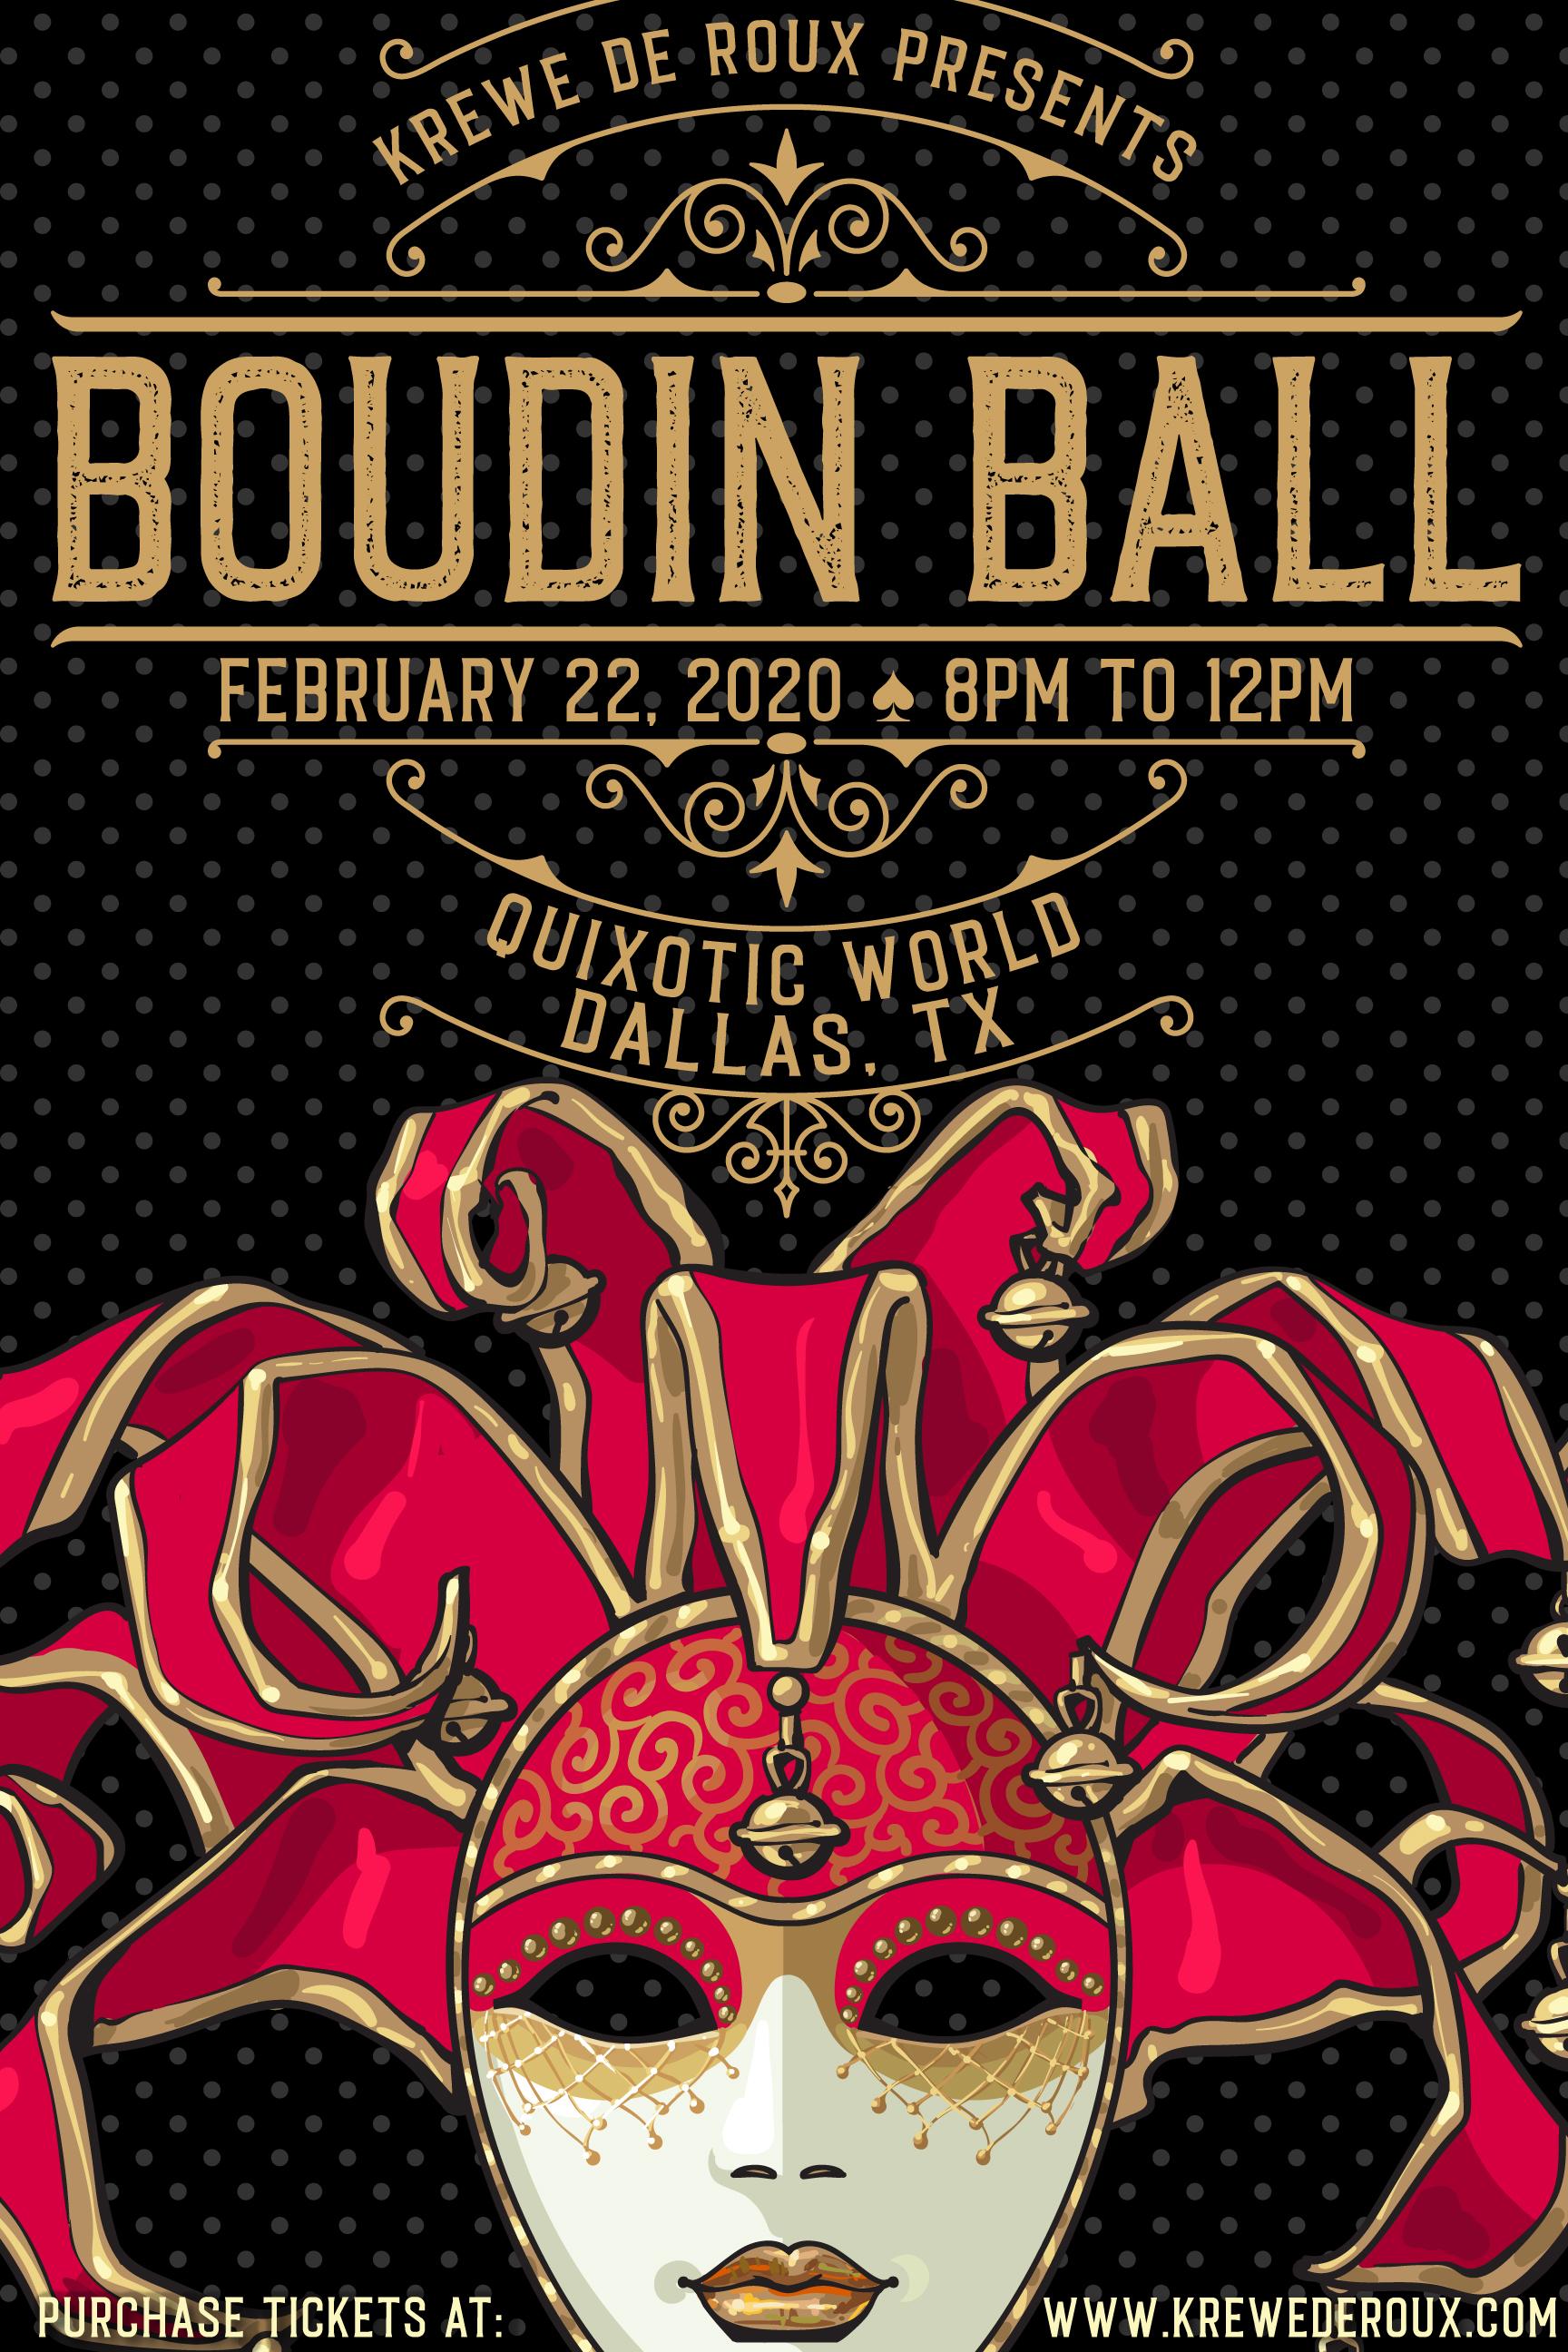 The 2020 Boudin Ball